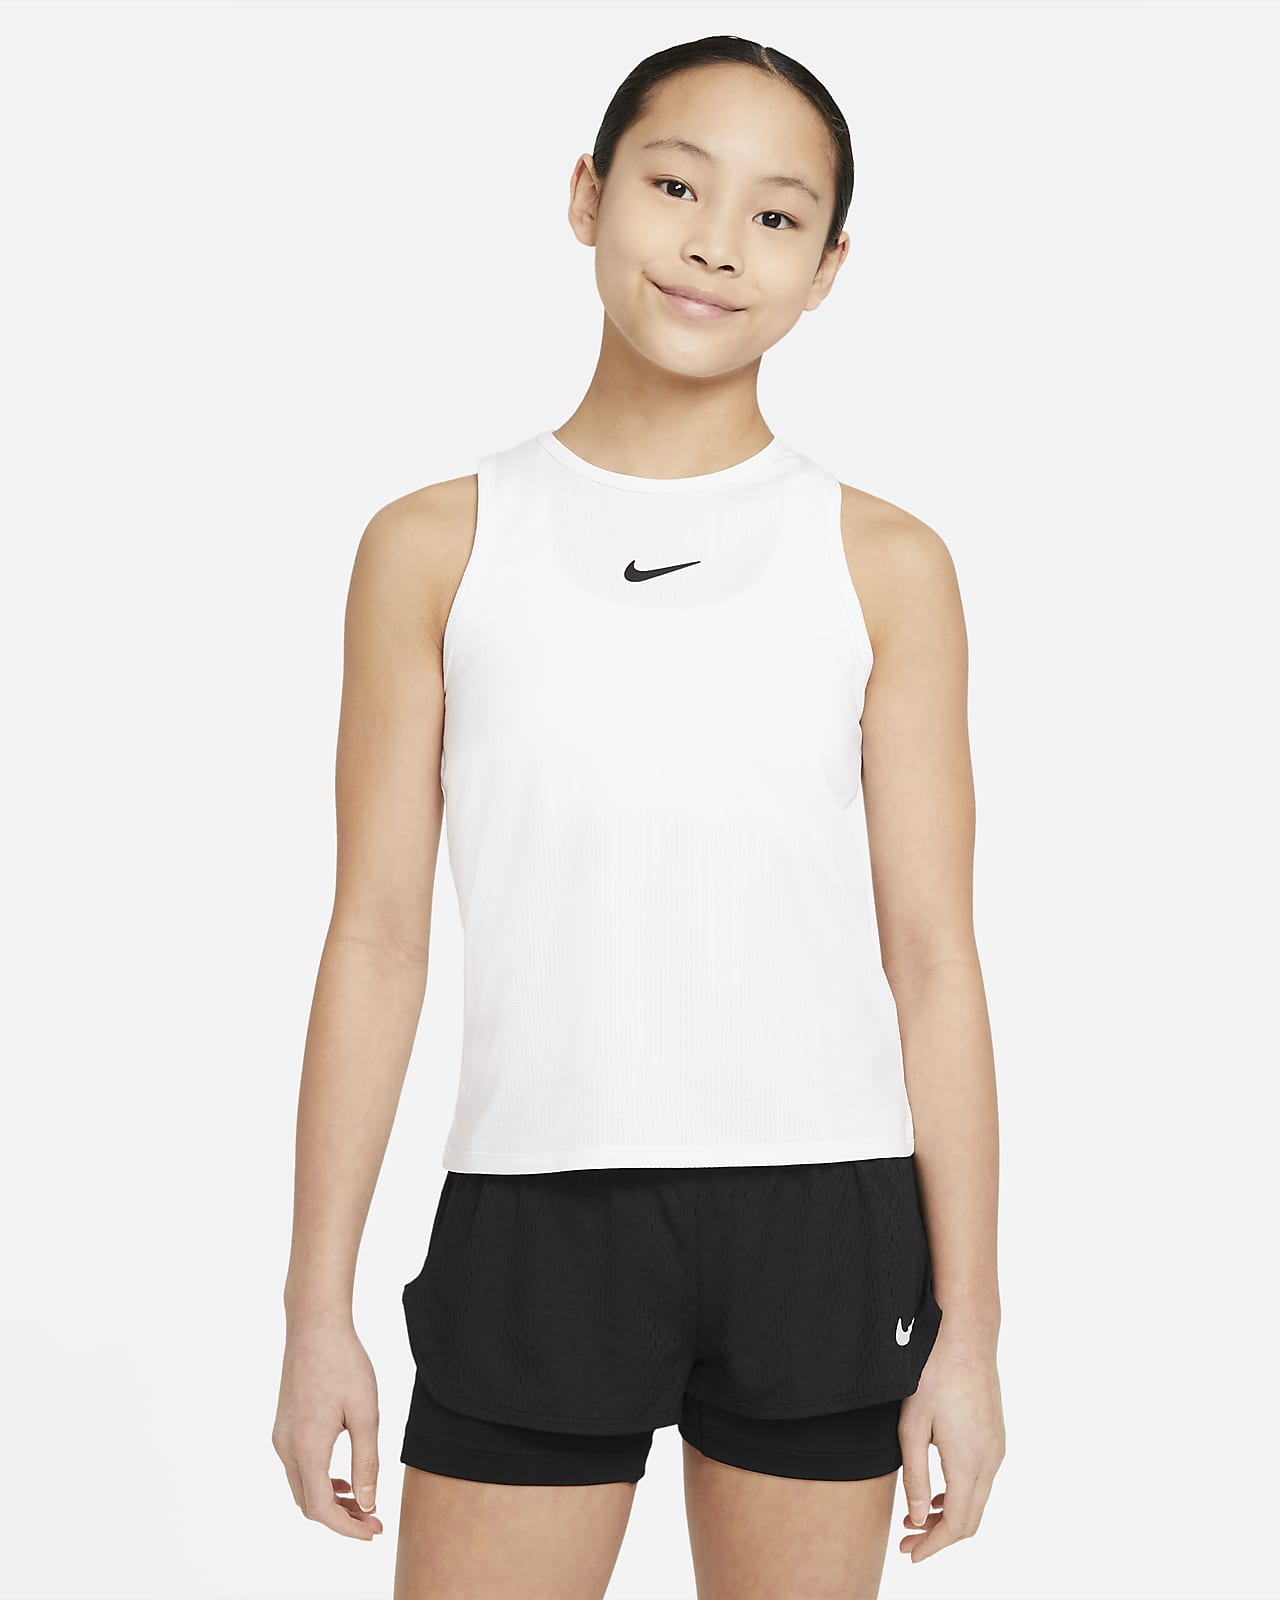 JACK SMITH Youth Girls Tennis Dress Golf Sleeveless Outfit School